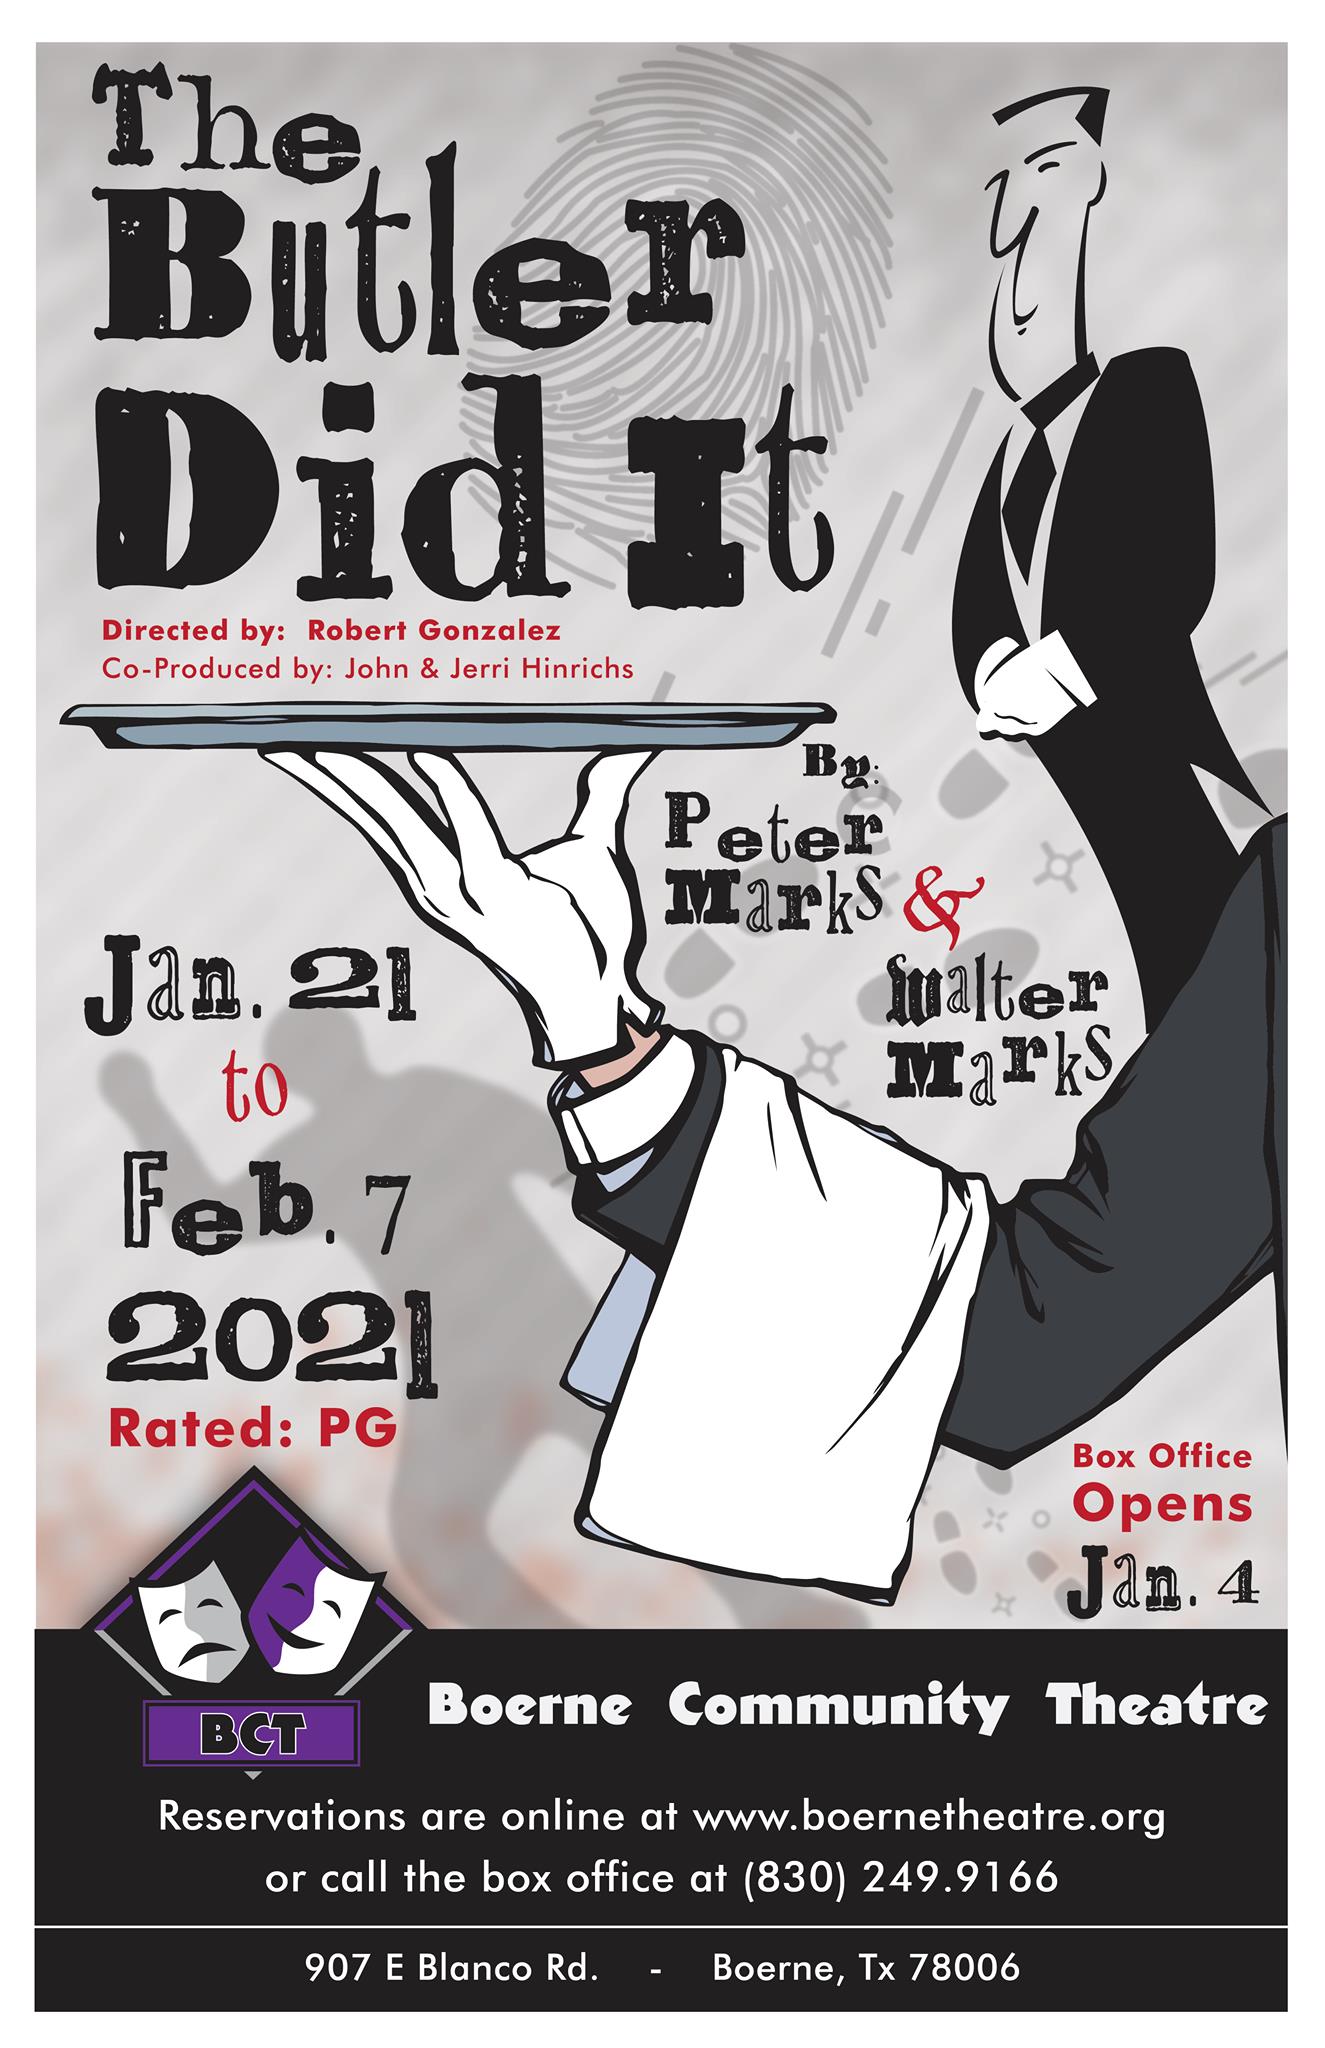 The Butler Did It by Boerne Community Theatre